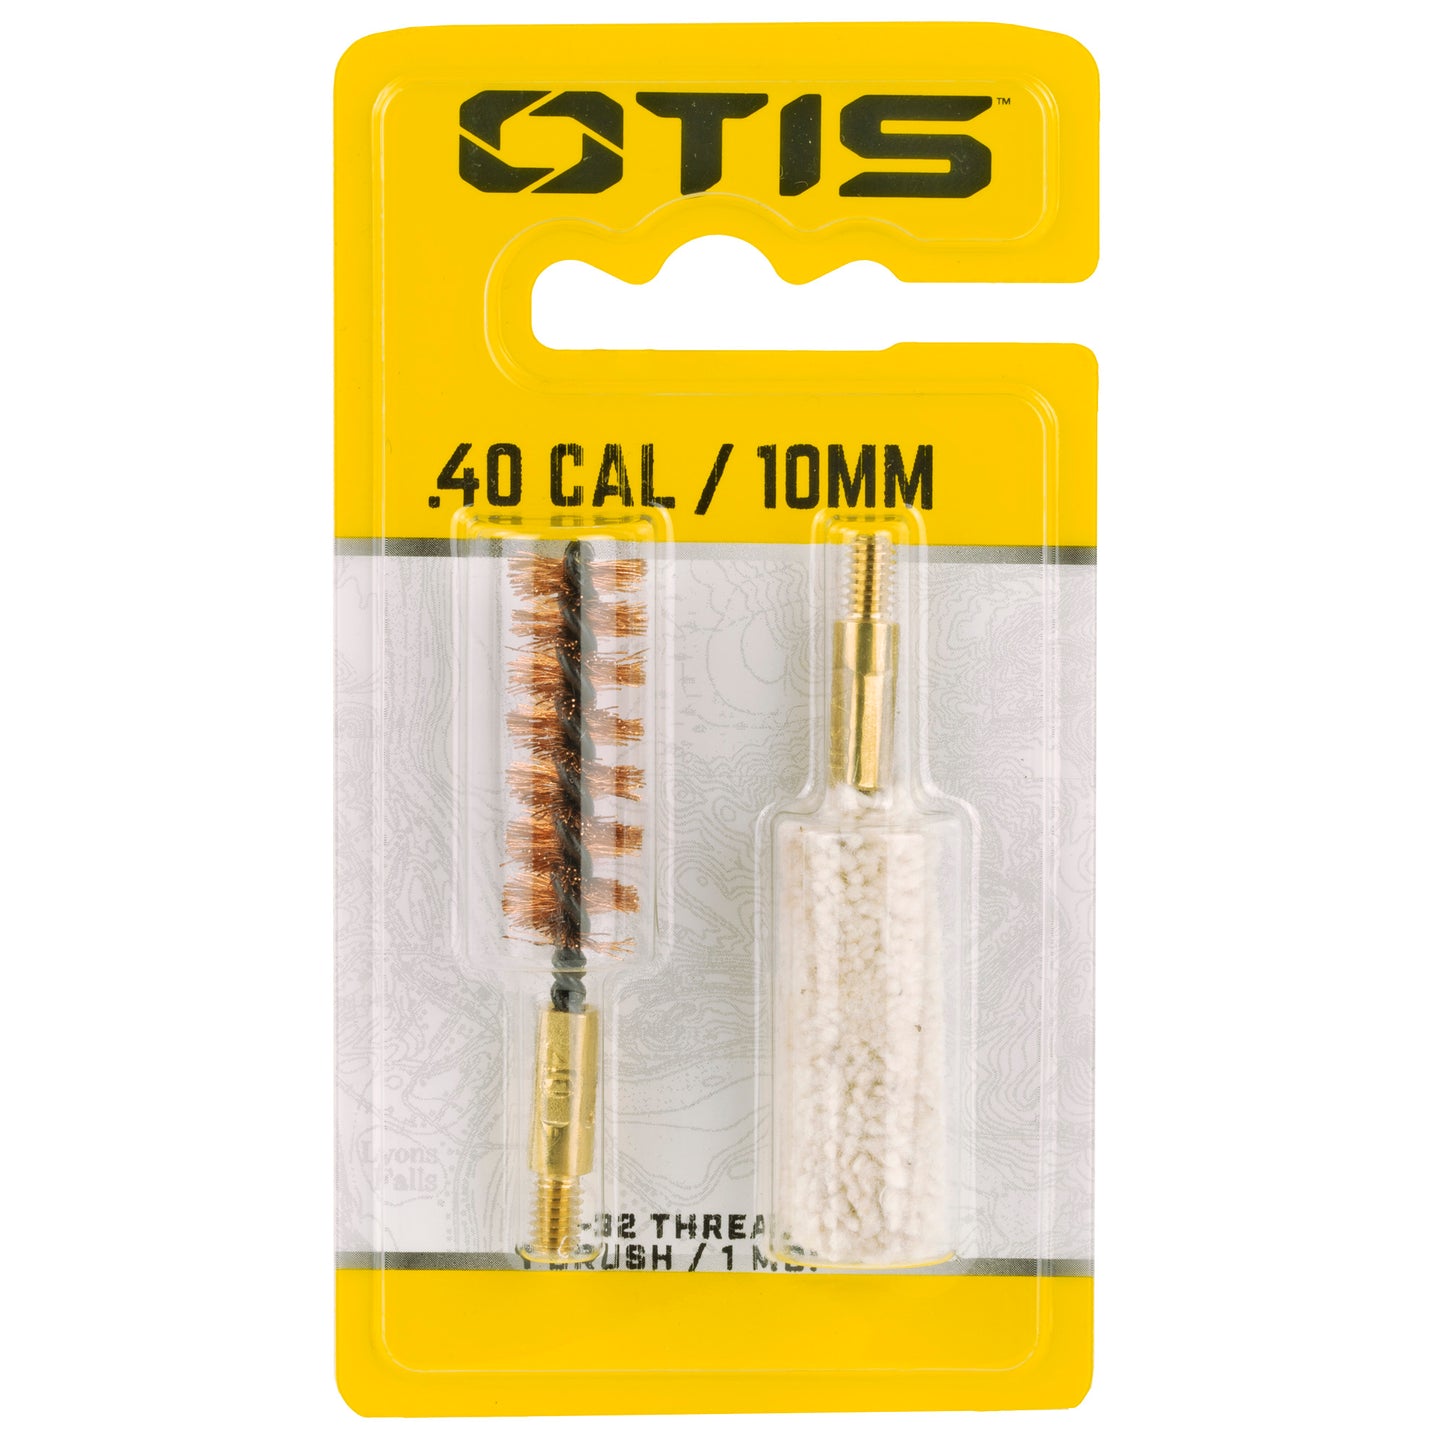 Otis Technology, Brush and Mop Combo Pack, For 10MM/40 Caliber, Includes 1 Brush and 1 Mop